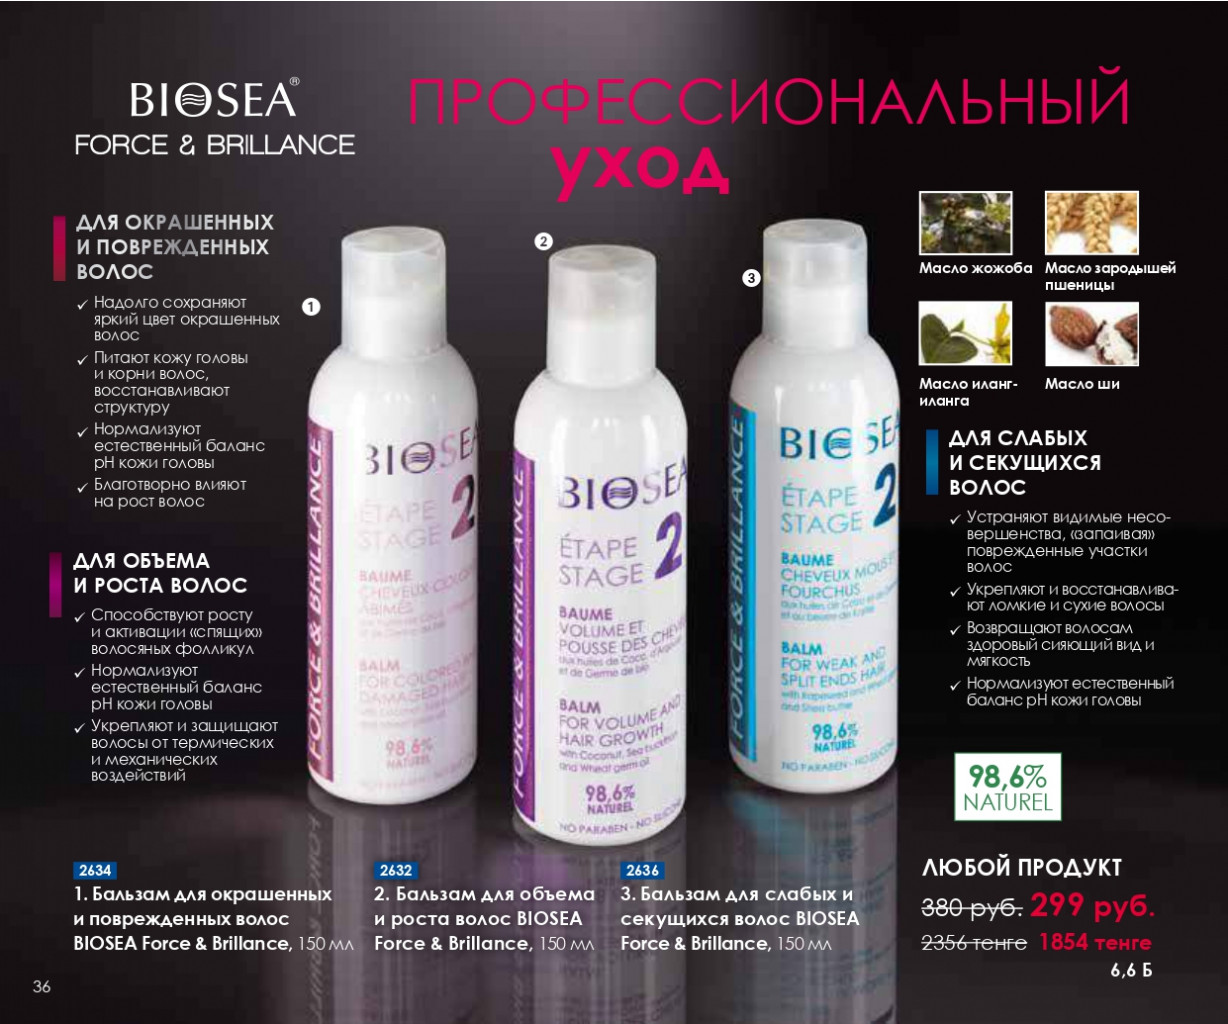 Catalog-biosea pages-to-jpg-0036.jpg